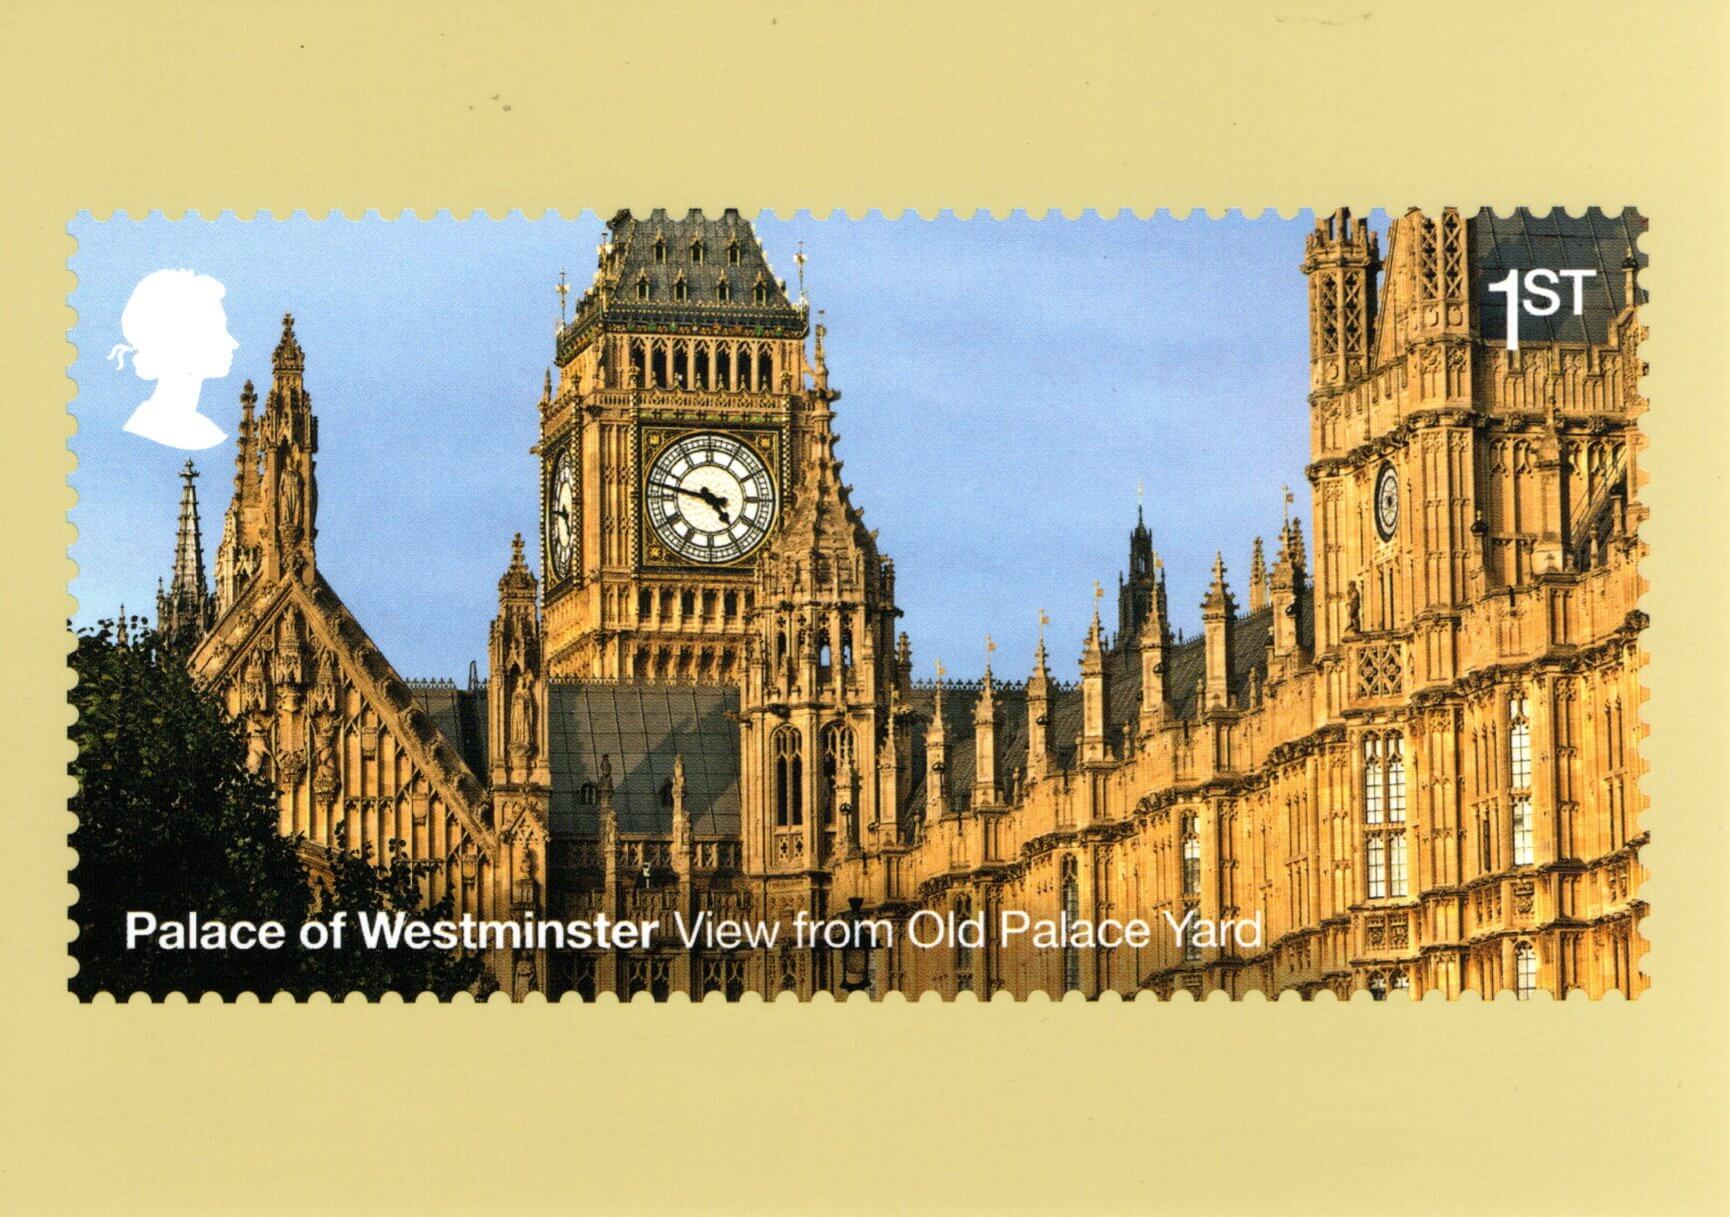 THE HOUSES OF PARLIAMENT Full Colour Commemorative GREAT BRITISH LANDMARKS 2020 